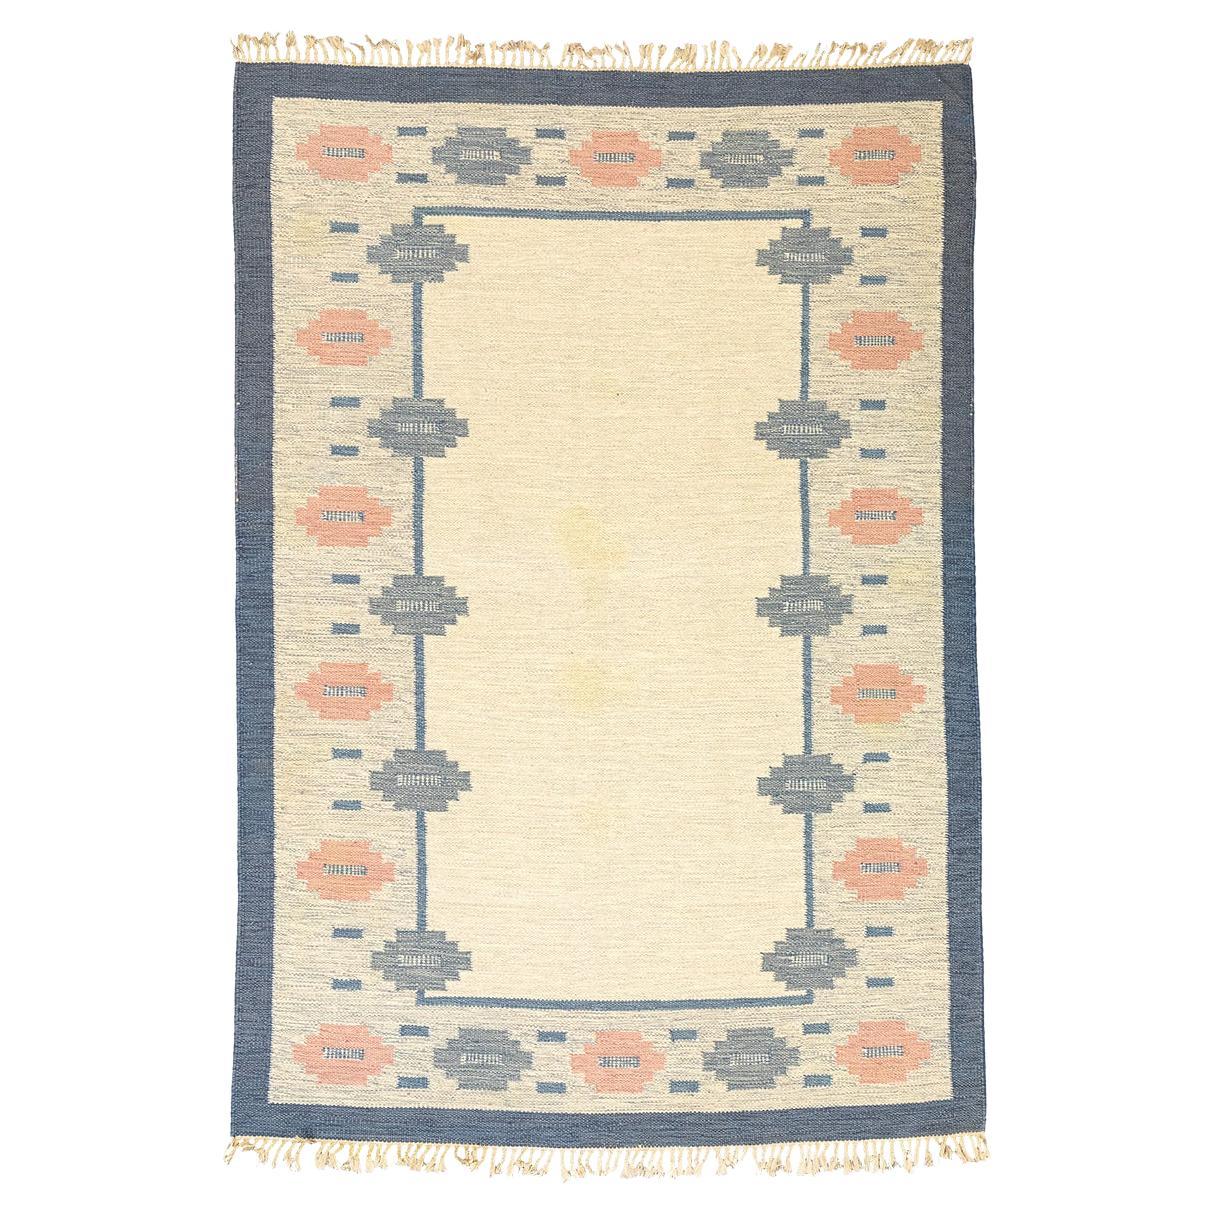 Rollakan Rug Swedish Abstract Design Soft Color Palette